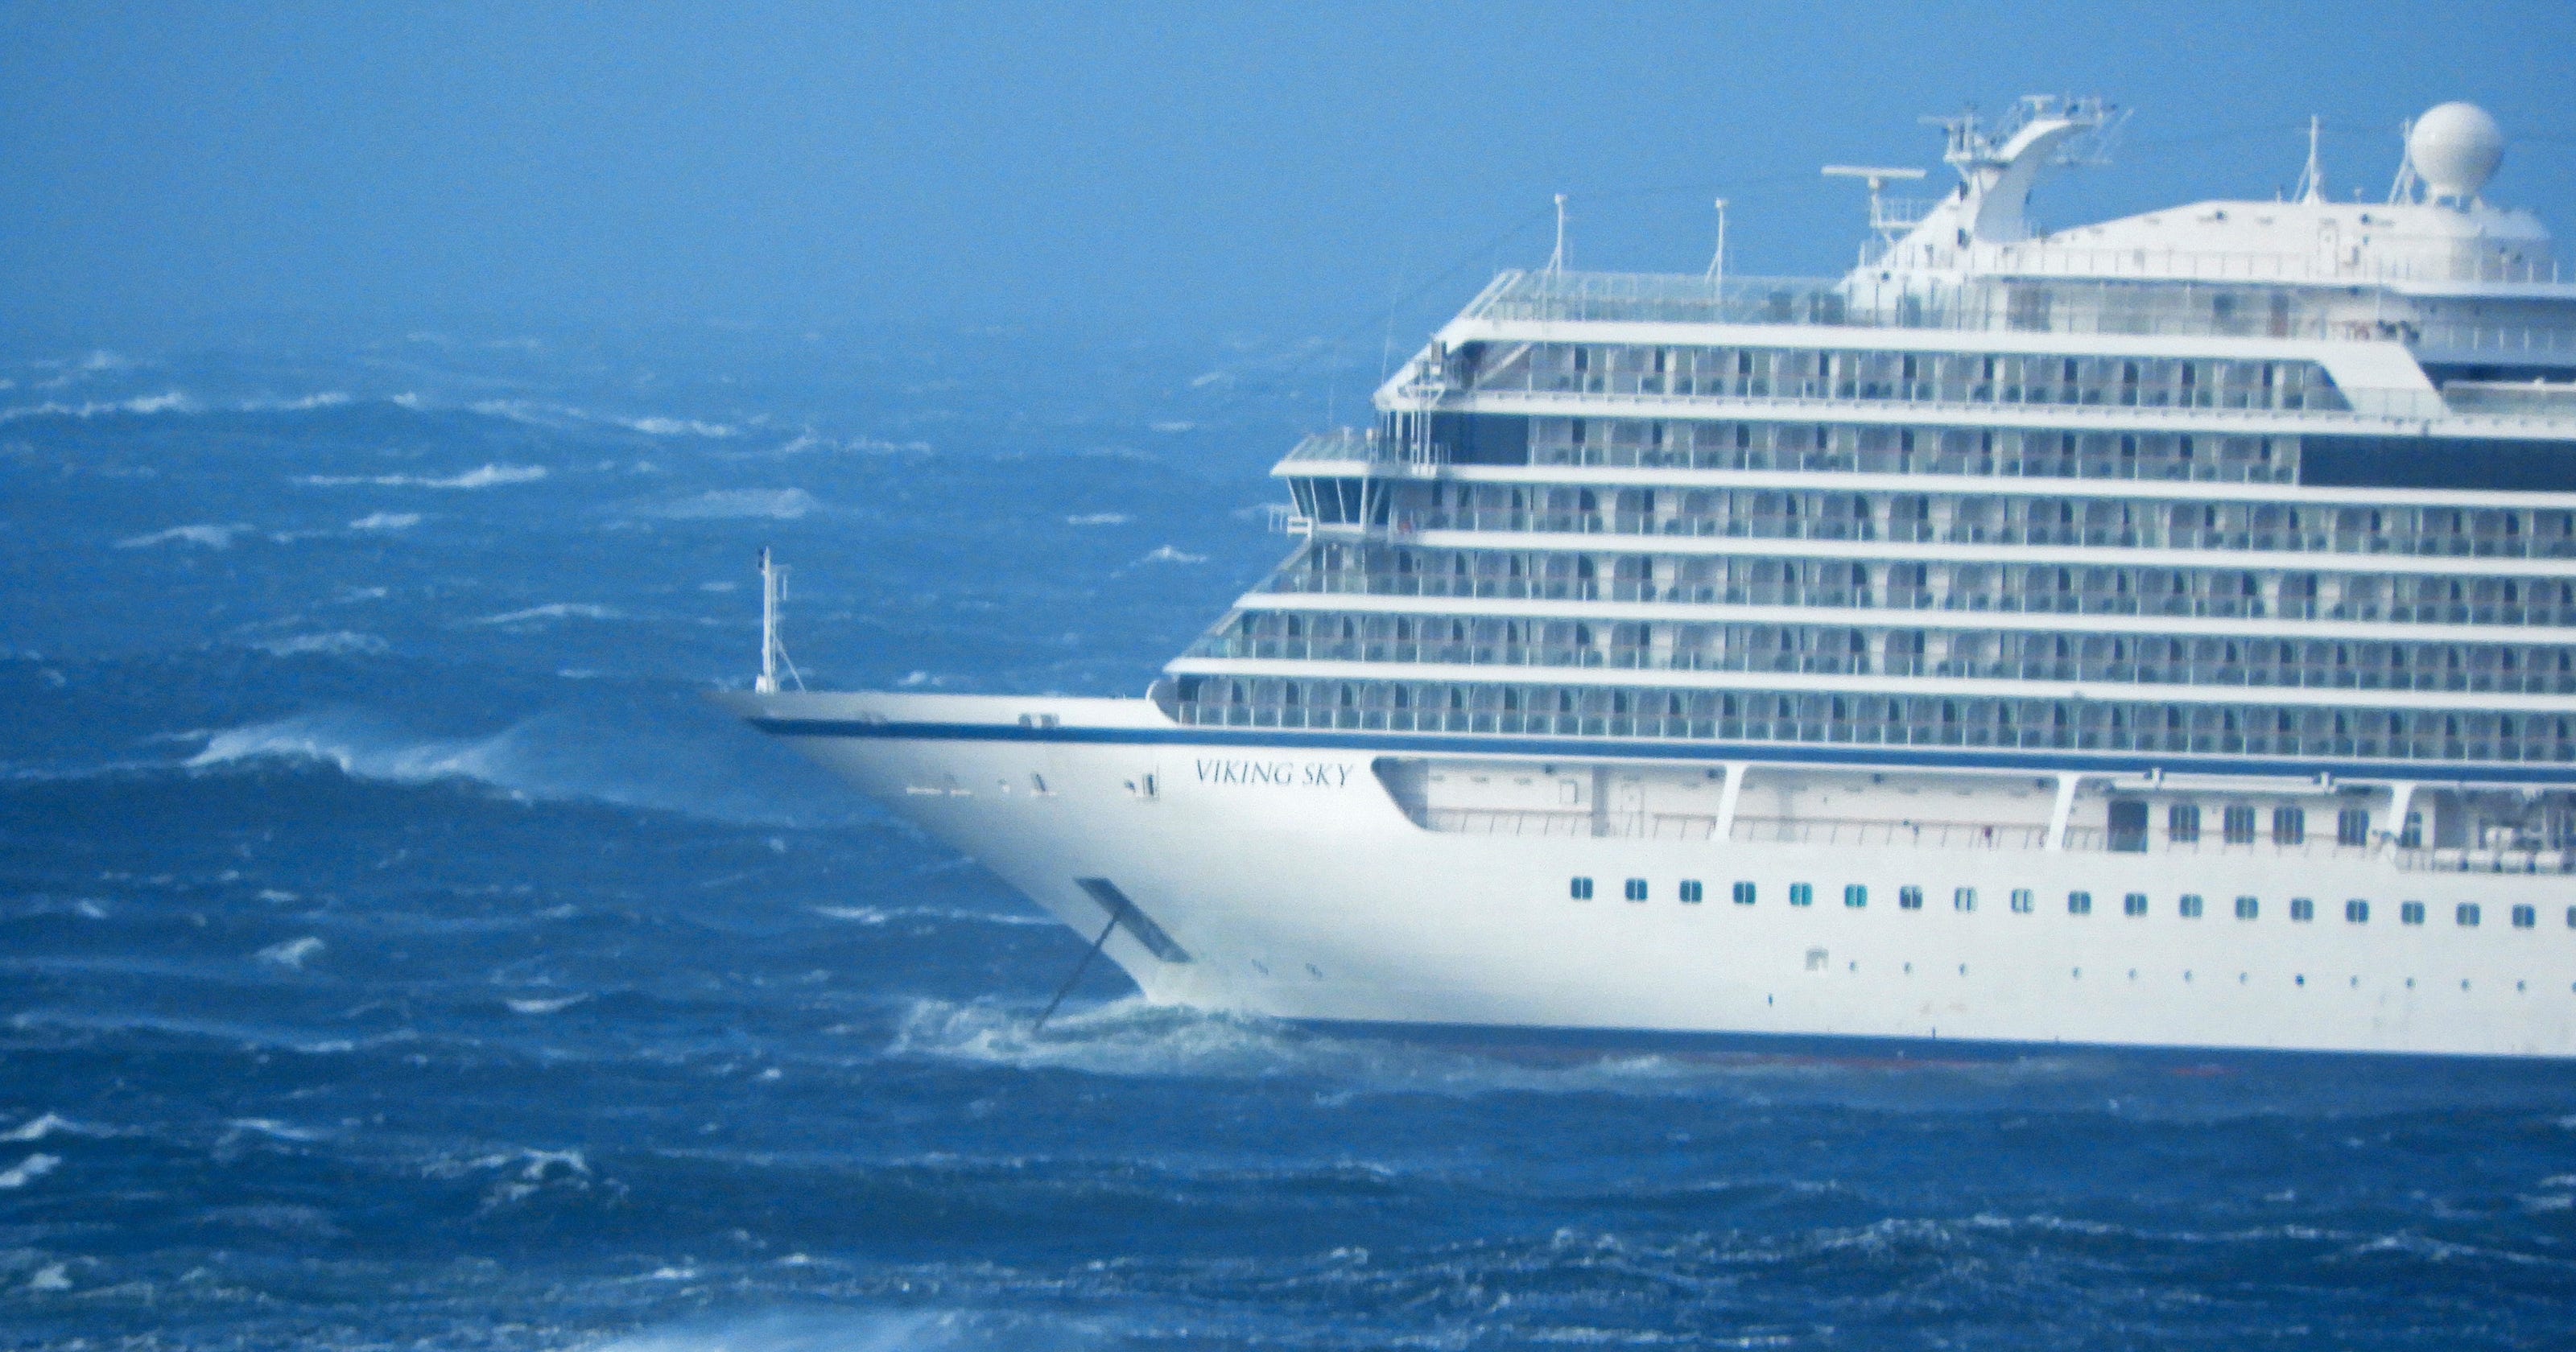 Viking Cruise Ship Rescue Leads To Concerns About Cruising